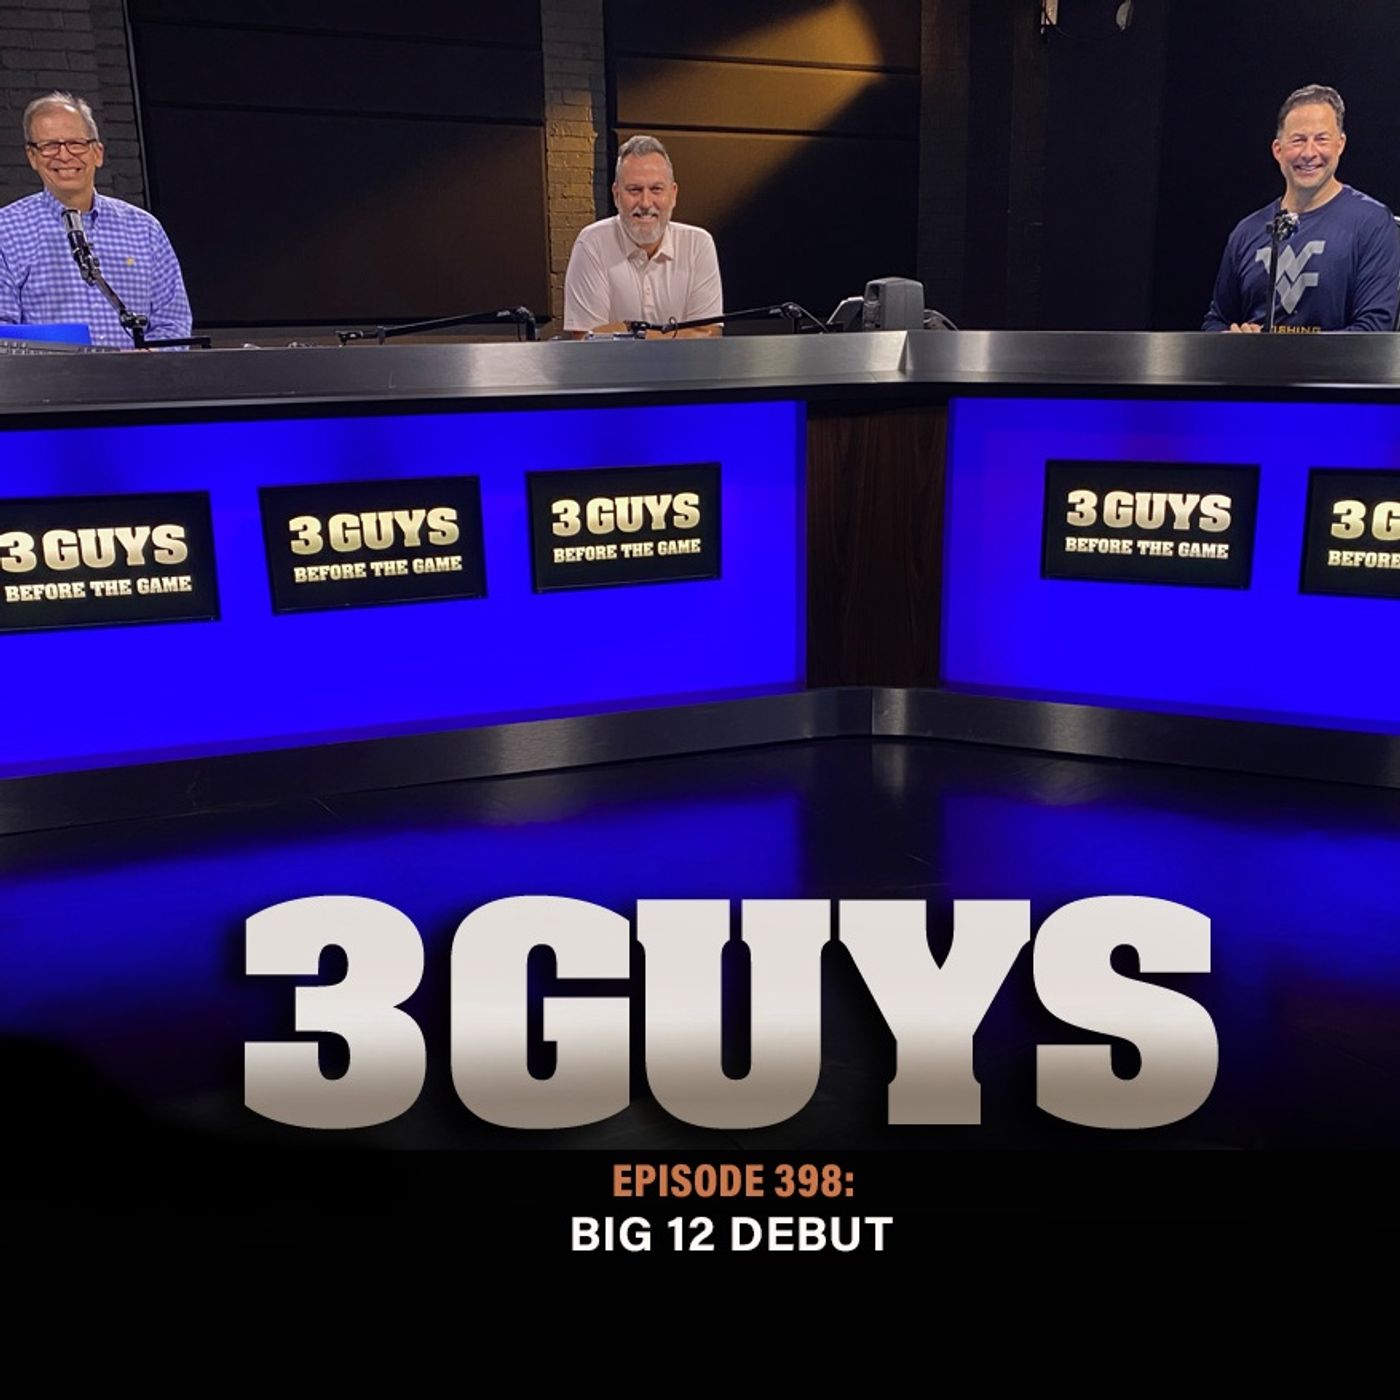 Three Guys Before The Game - Big 12 Debut  (Episode 398)